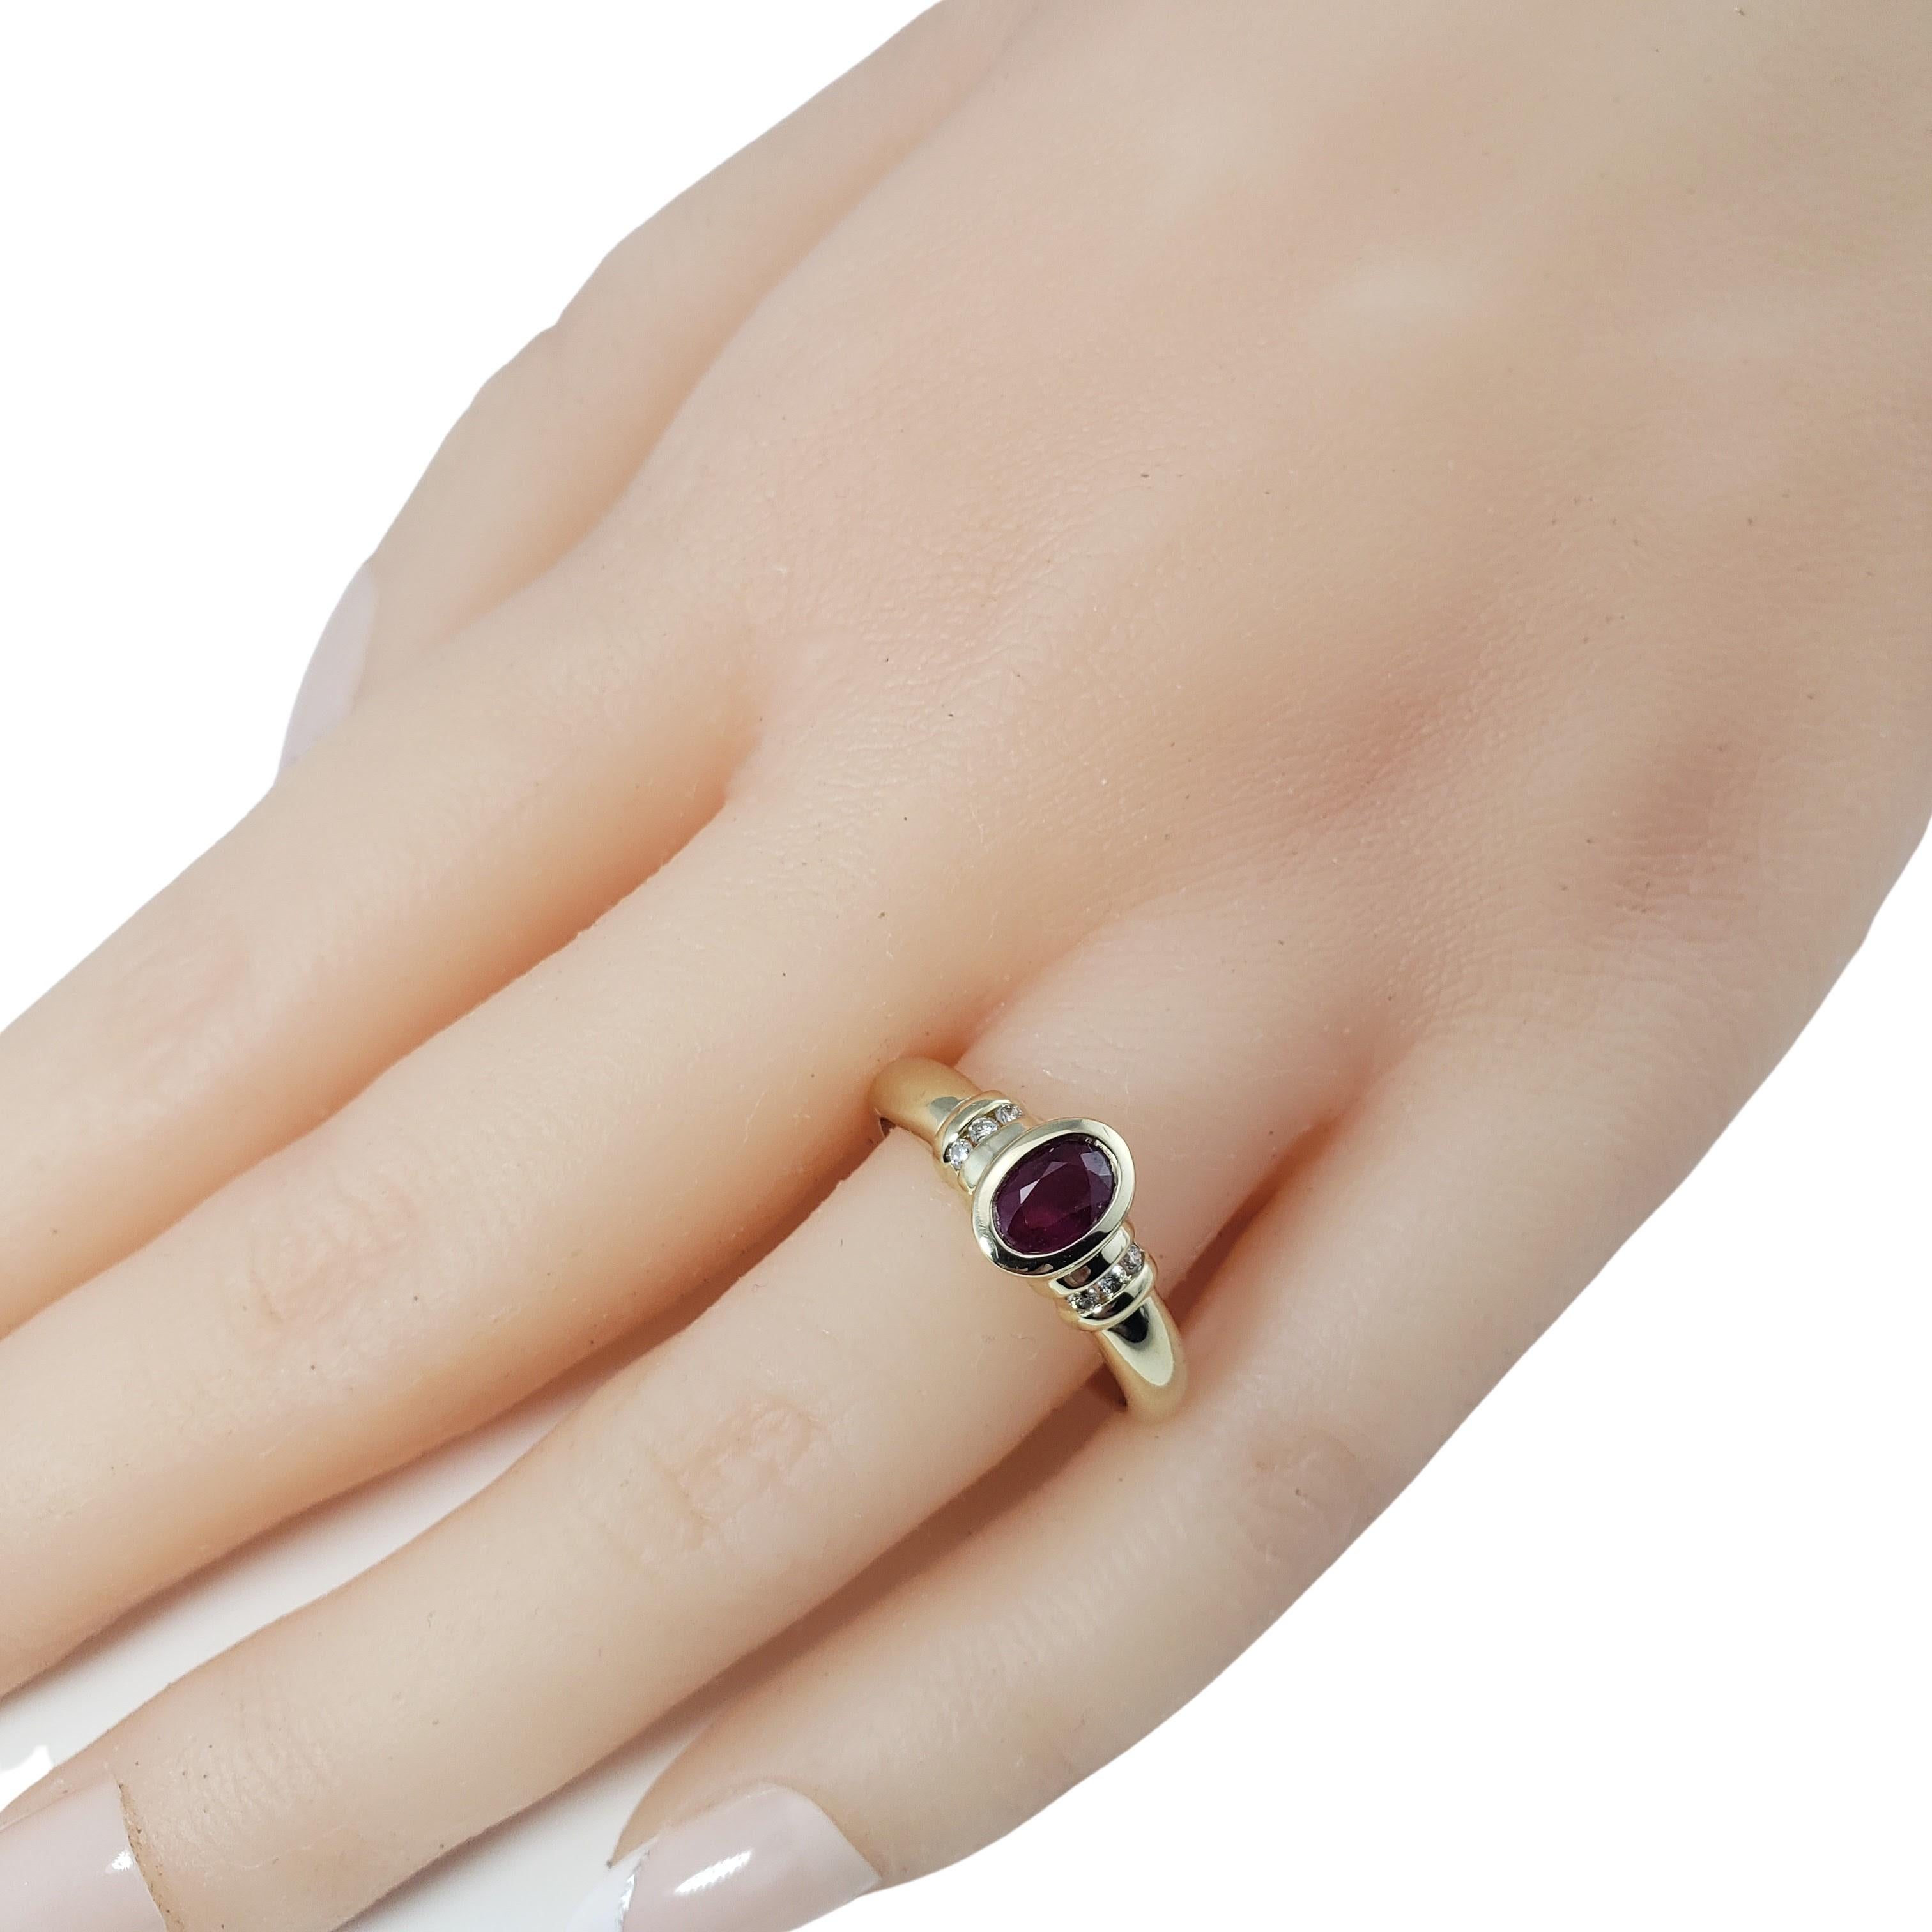 Vintage 14 Karat Yellow Gold Ruby and Diamond Ring Size 7.25-

This lovely ring features one oval ruby (6 mm x 5 mm) and six round brilliant cut diamonds set in classic 14K yellow gold.
Shank: 2 mm.

Approximate total diamond weight: .03